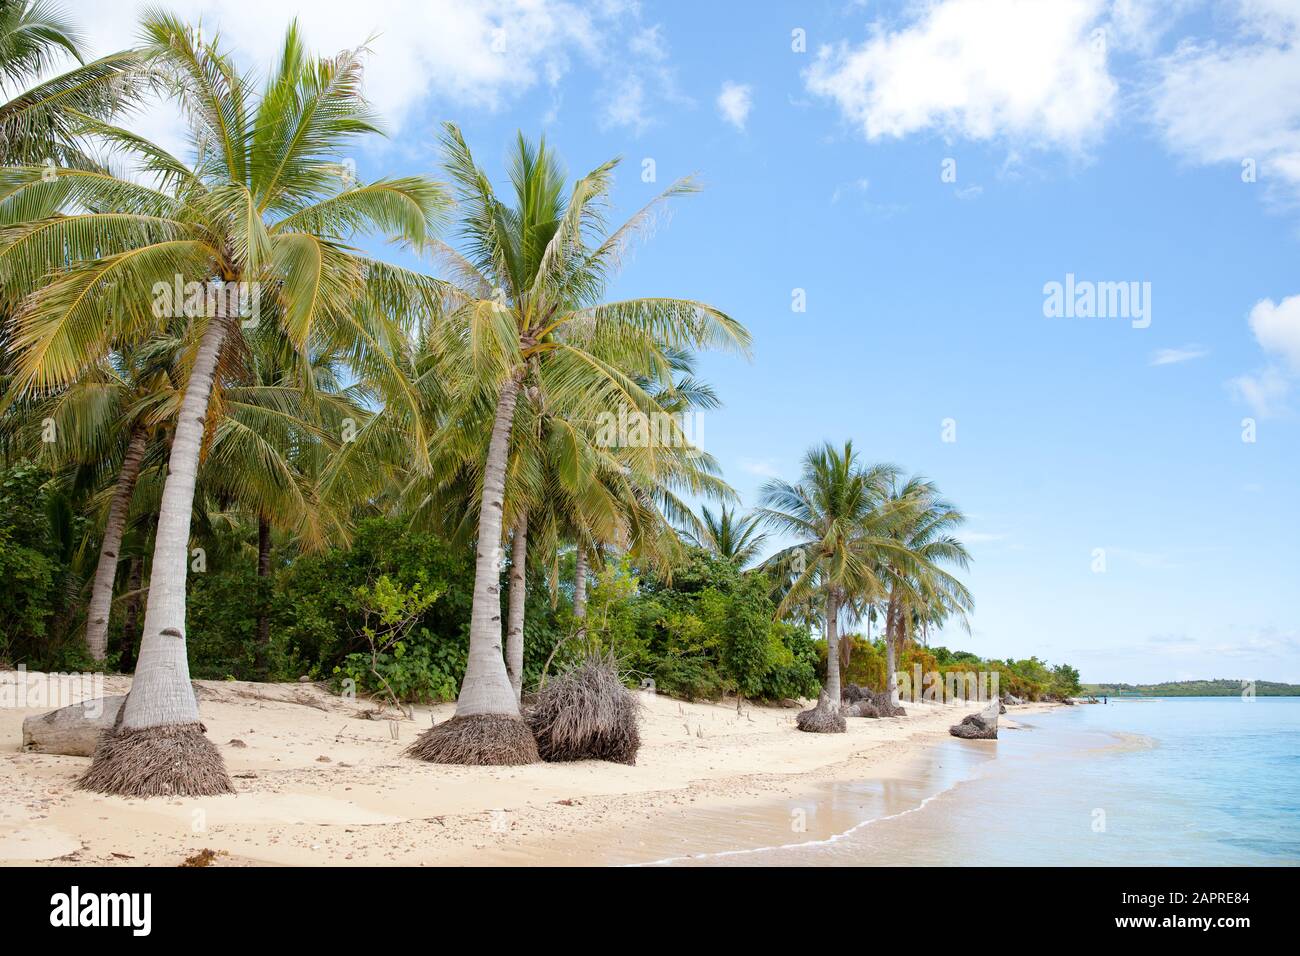 Tropical island with a white sandy beach. The nature of the Philippine Islands. Stock Photo